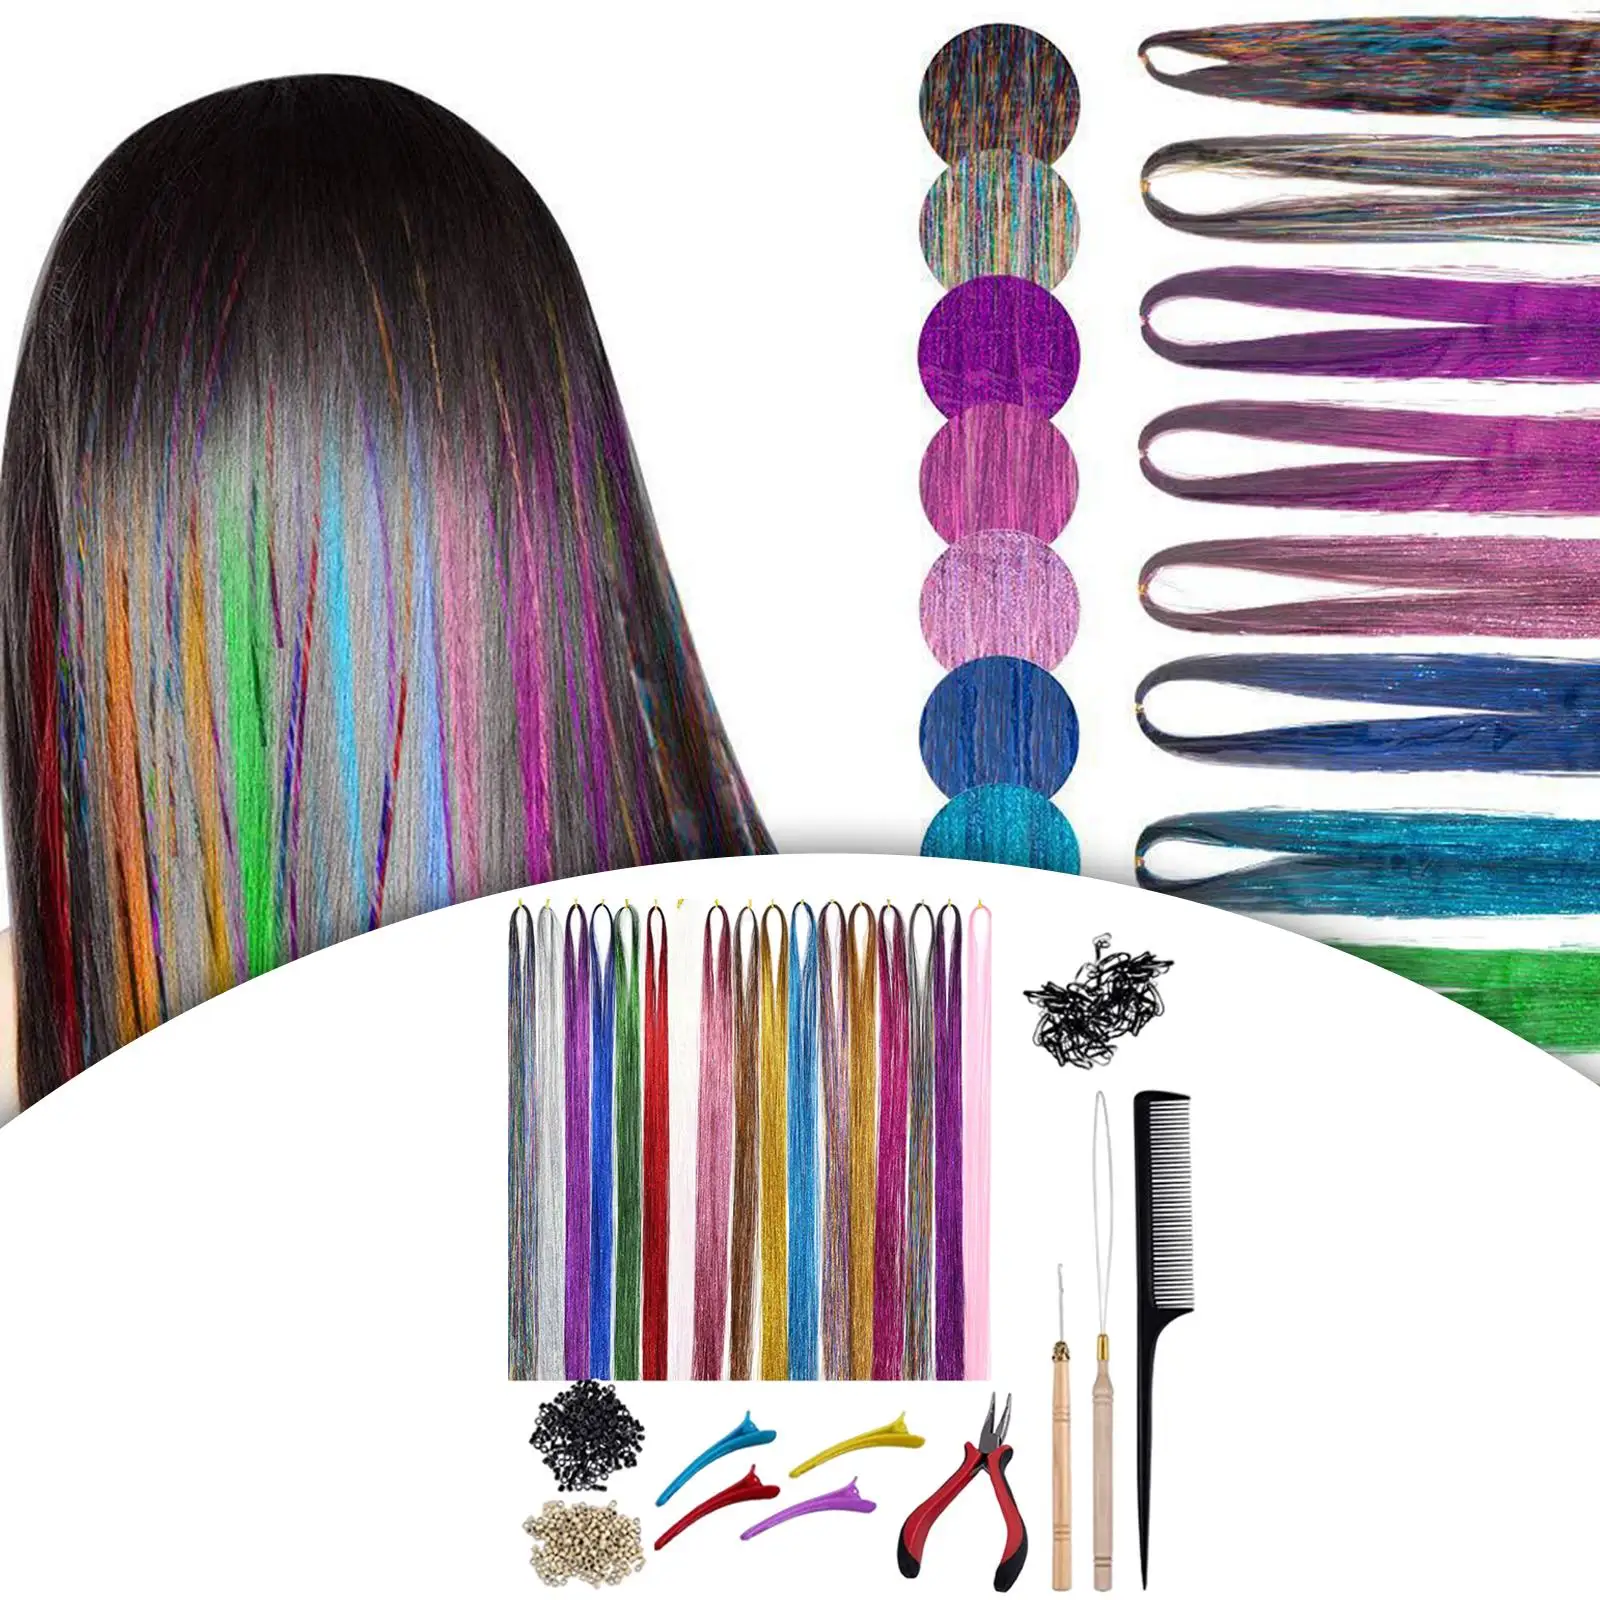  Tinsel Kit 12 Colors 200Pcs Rings Beads Hair Accessories with Tools for Cosplay Hair Styling Party Braiding Hair Women Girls